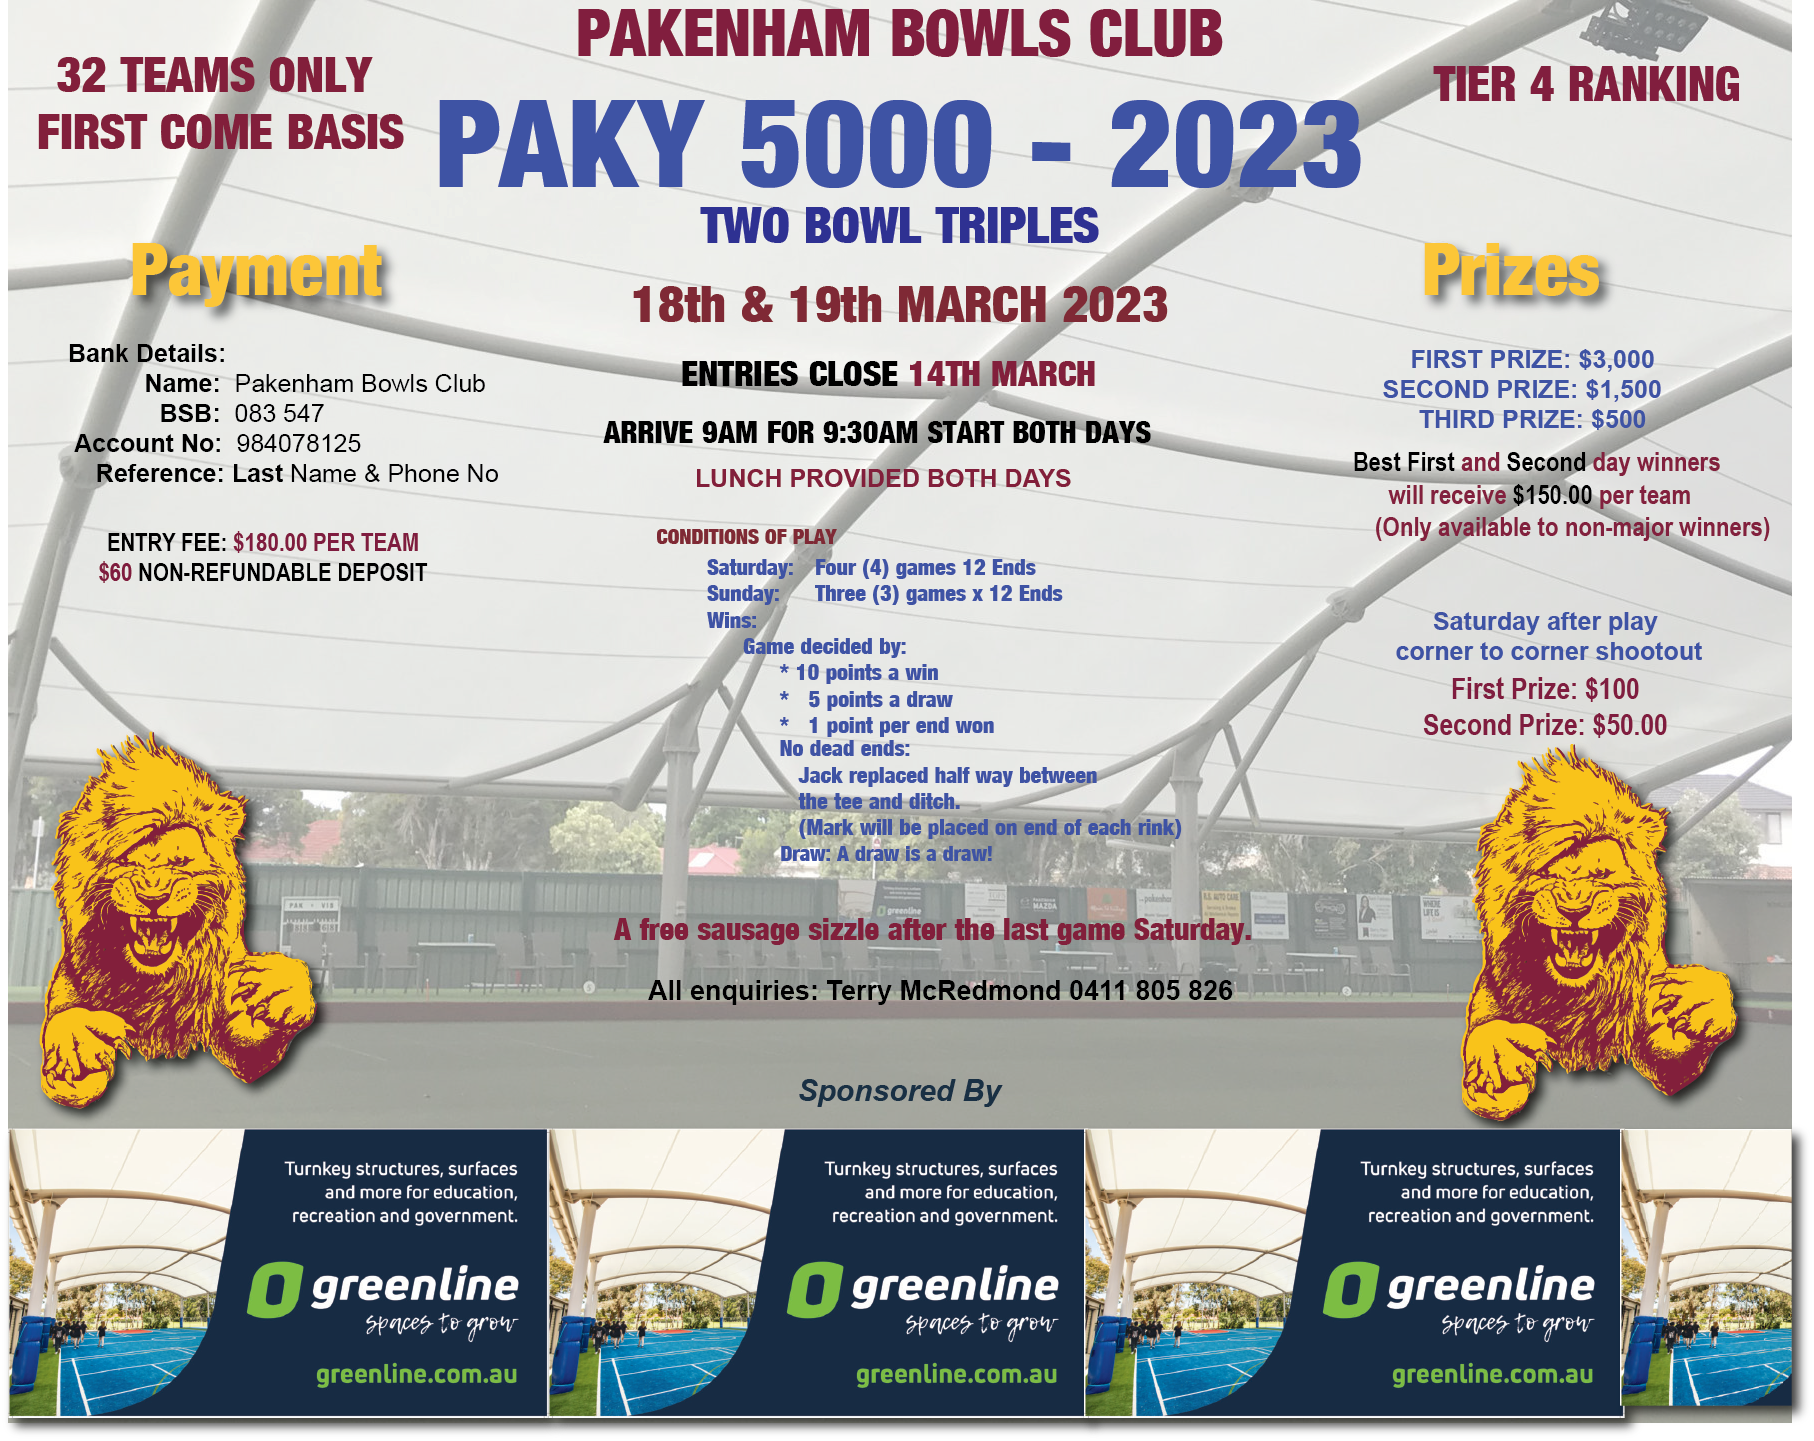 Pakenham Bowls Club Paky 5000 - 2023. 18th and 19th March 2023 entries close 14th March contact Terry McRedmond on 0411 805 826